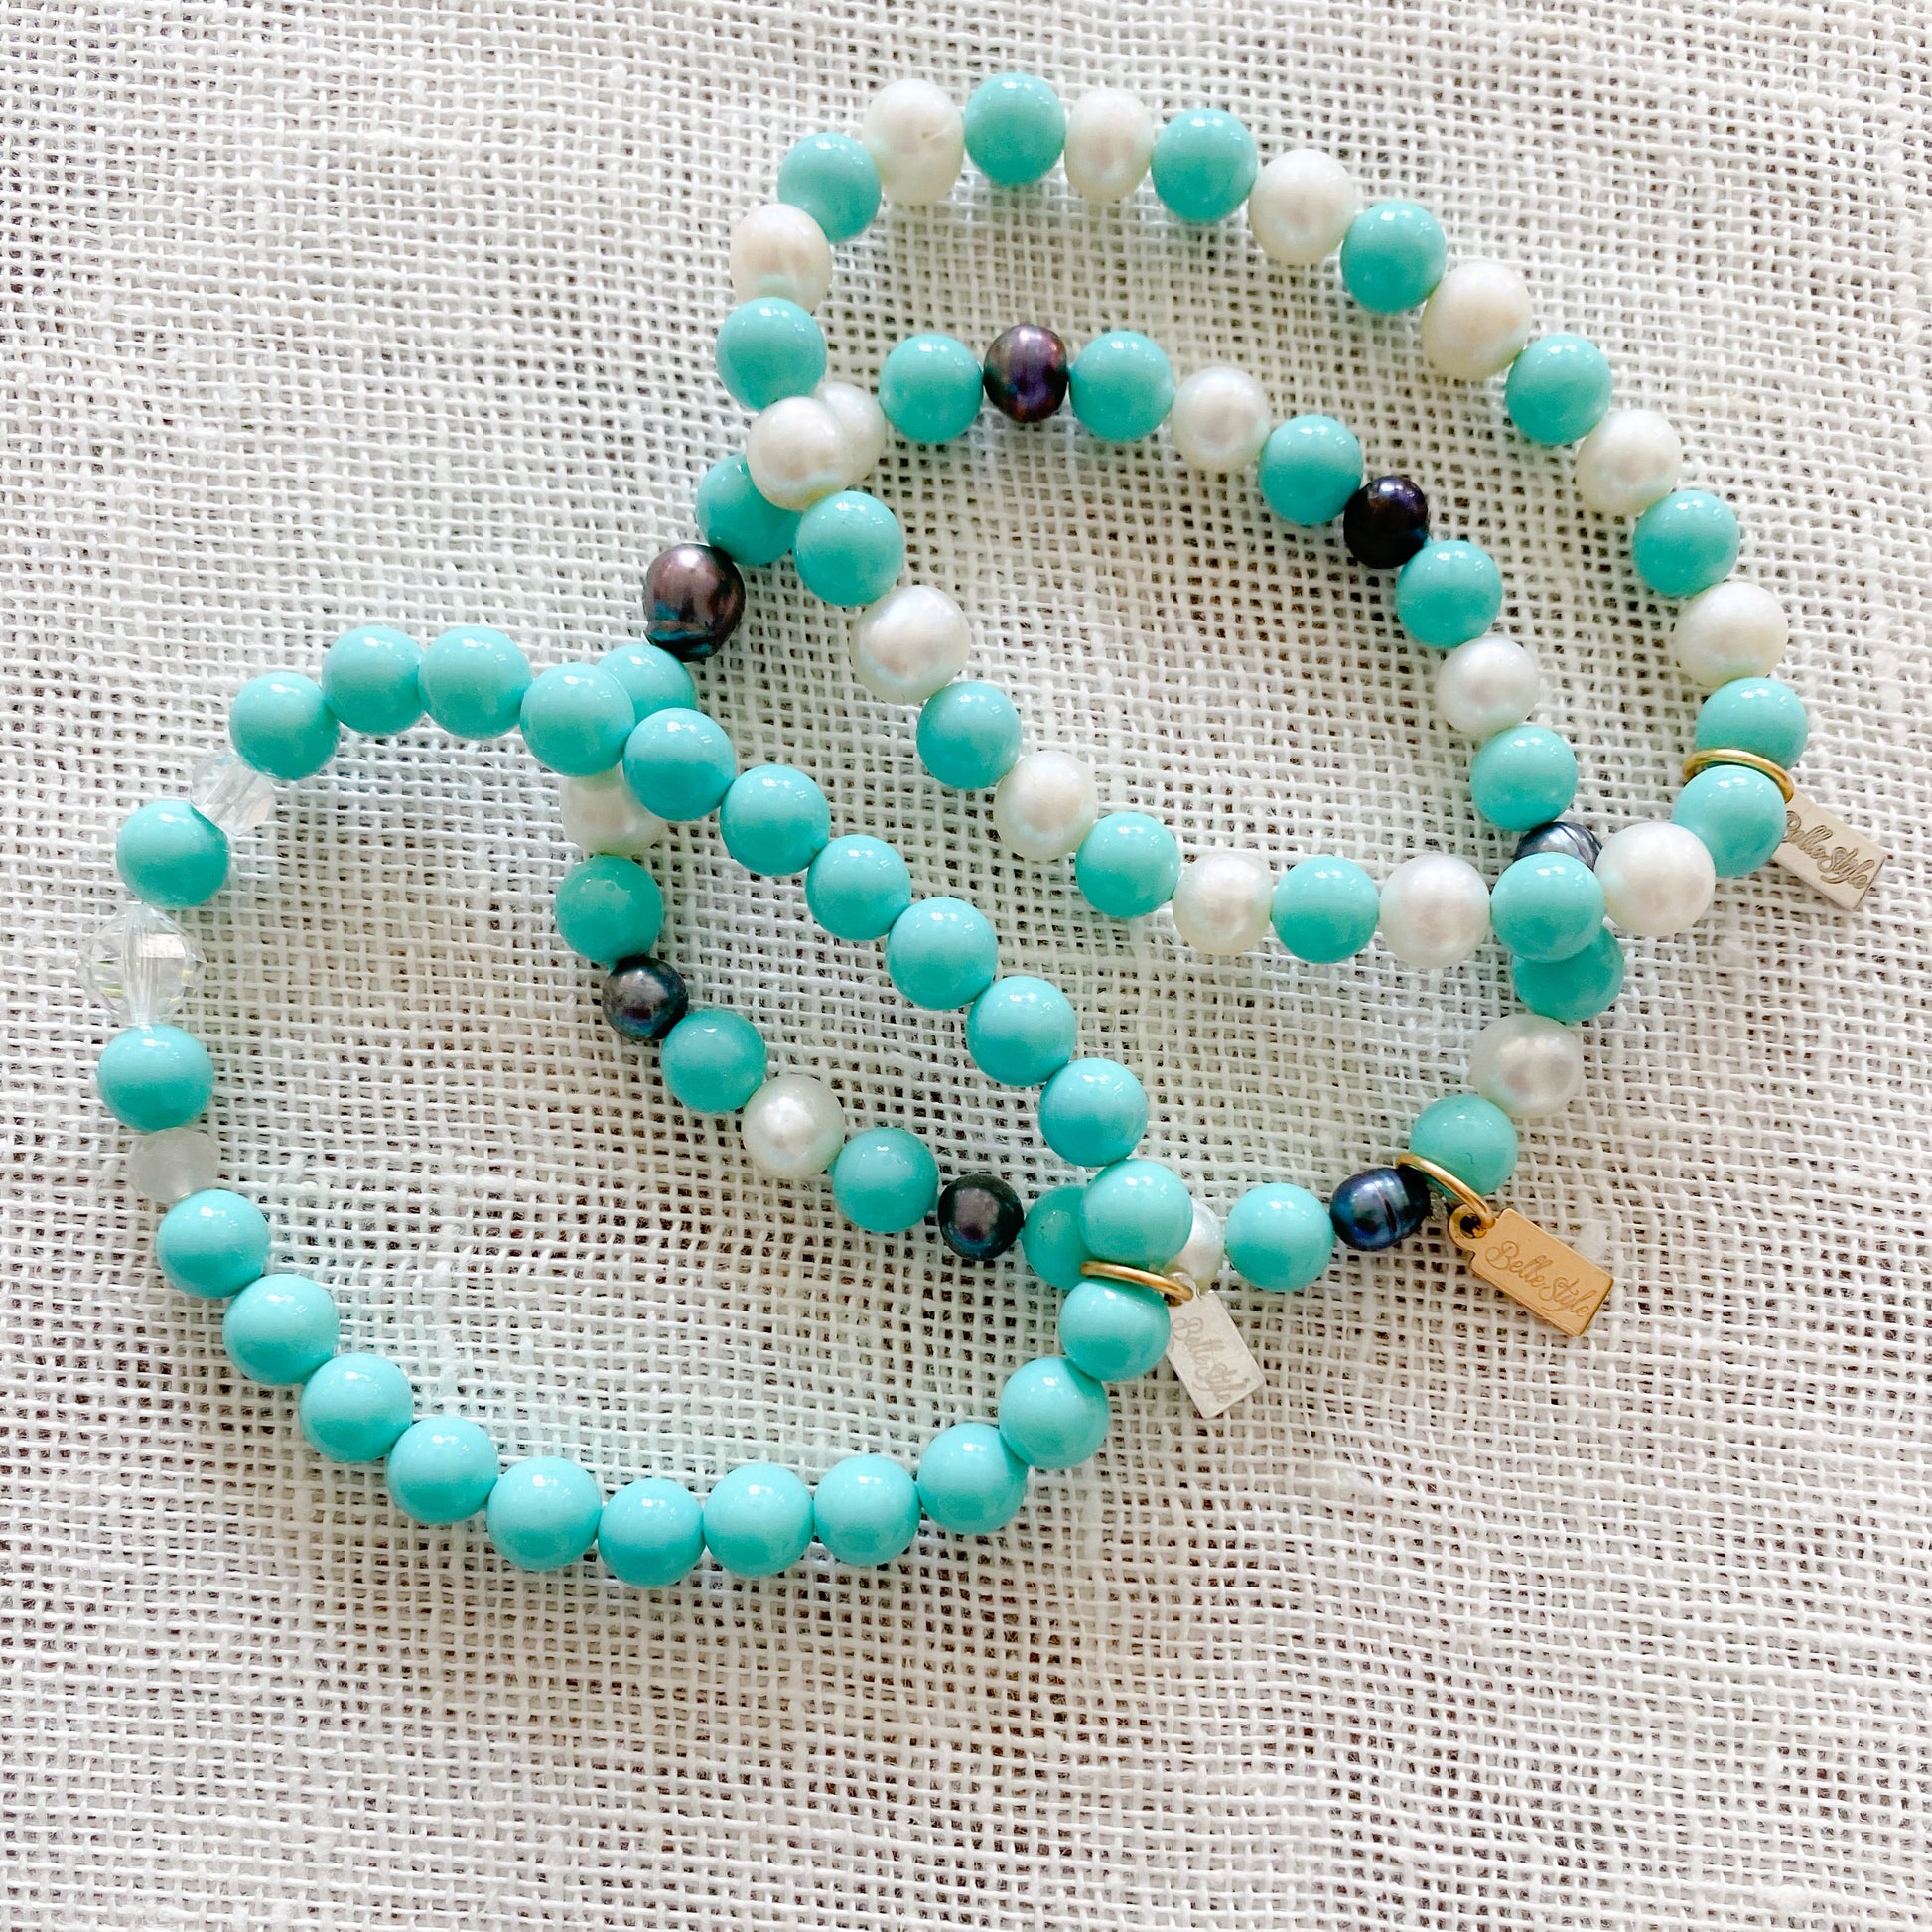 Didi Freshwater Pearl Bracelet - Bellestyle turquoise black white mother of pearl stretch